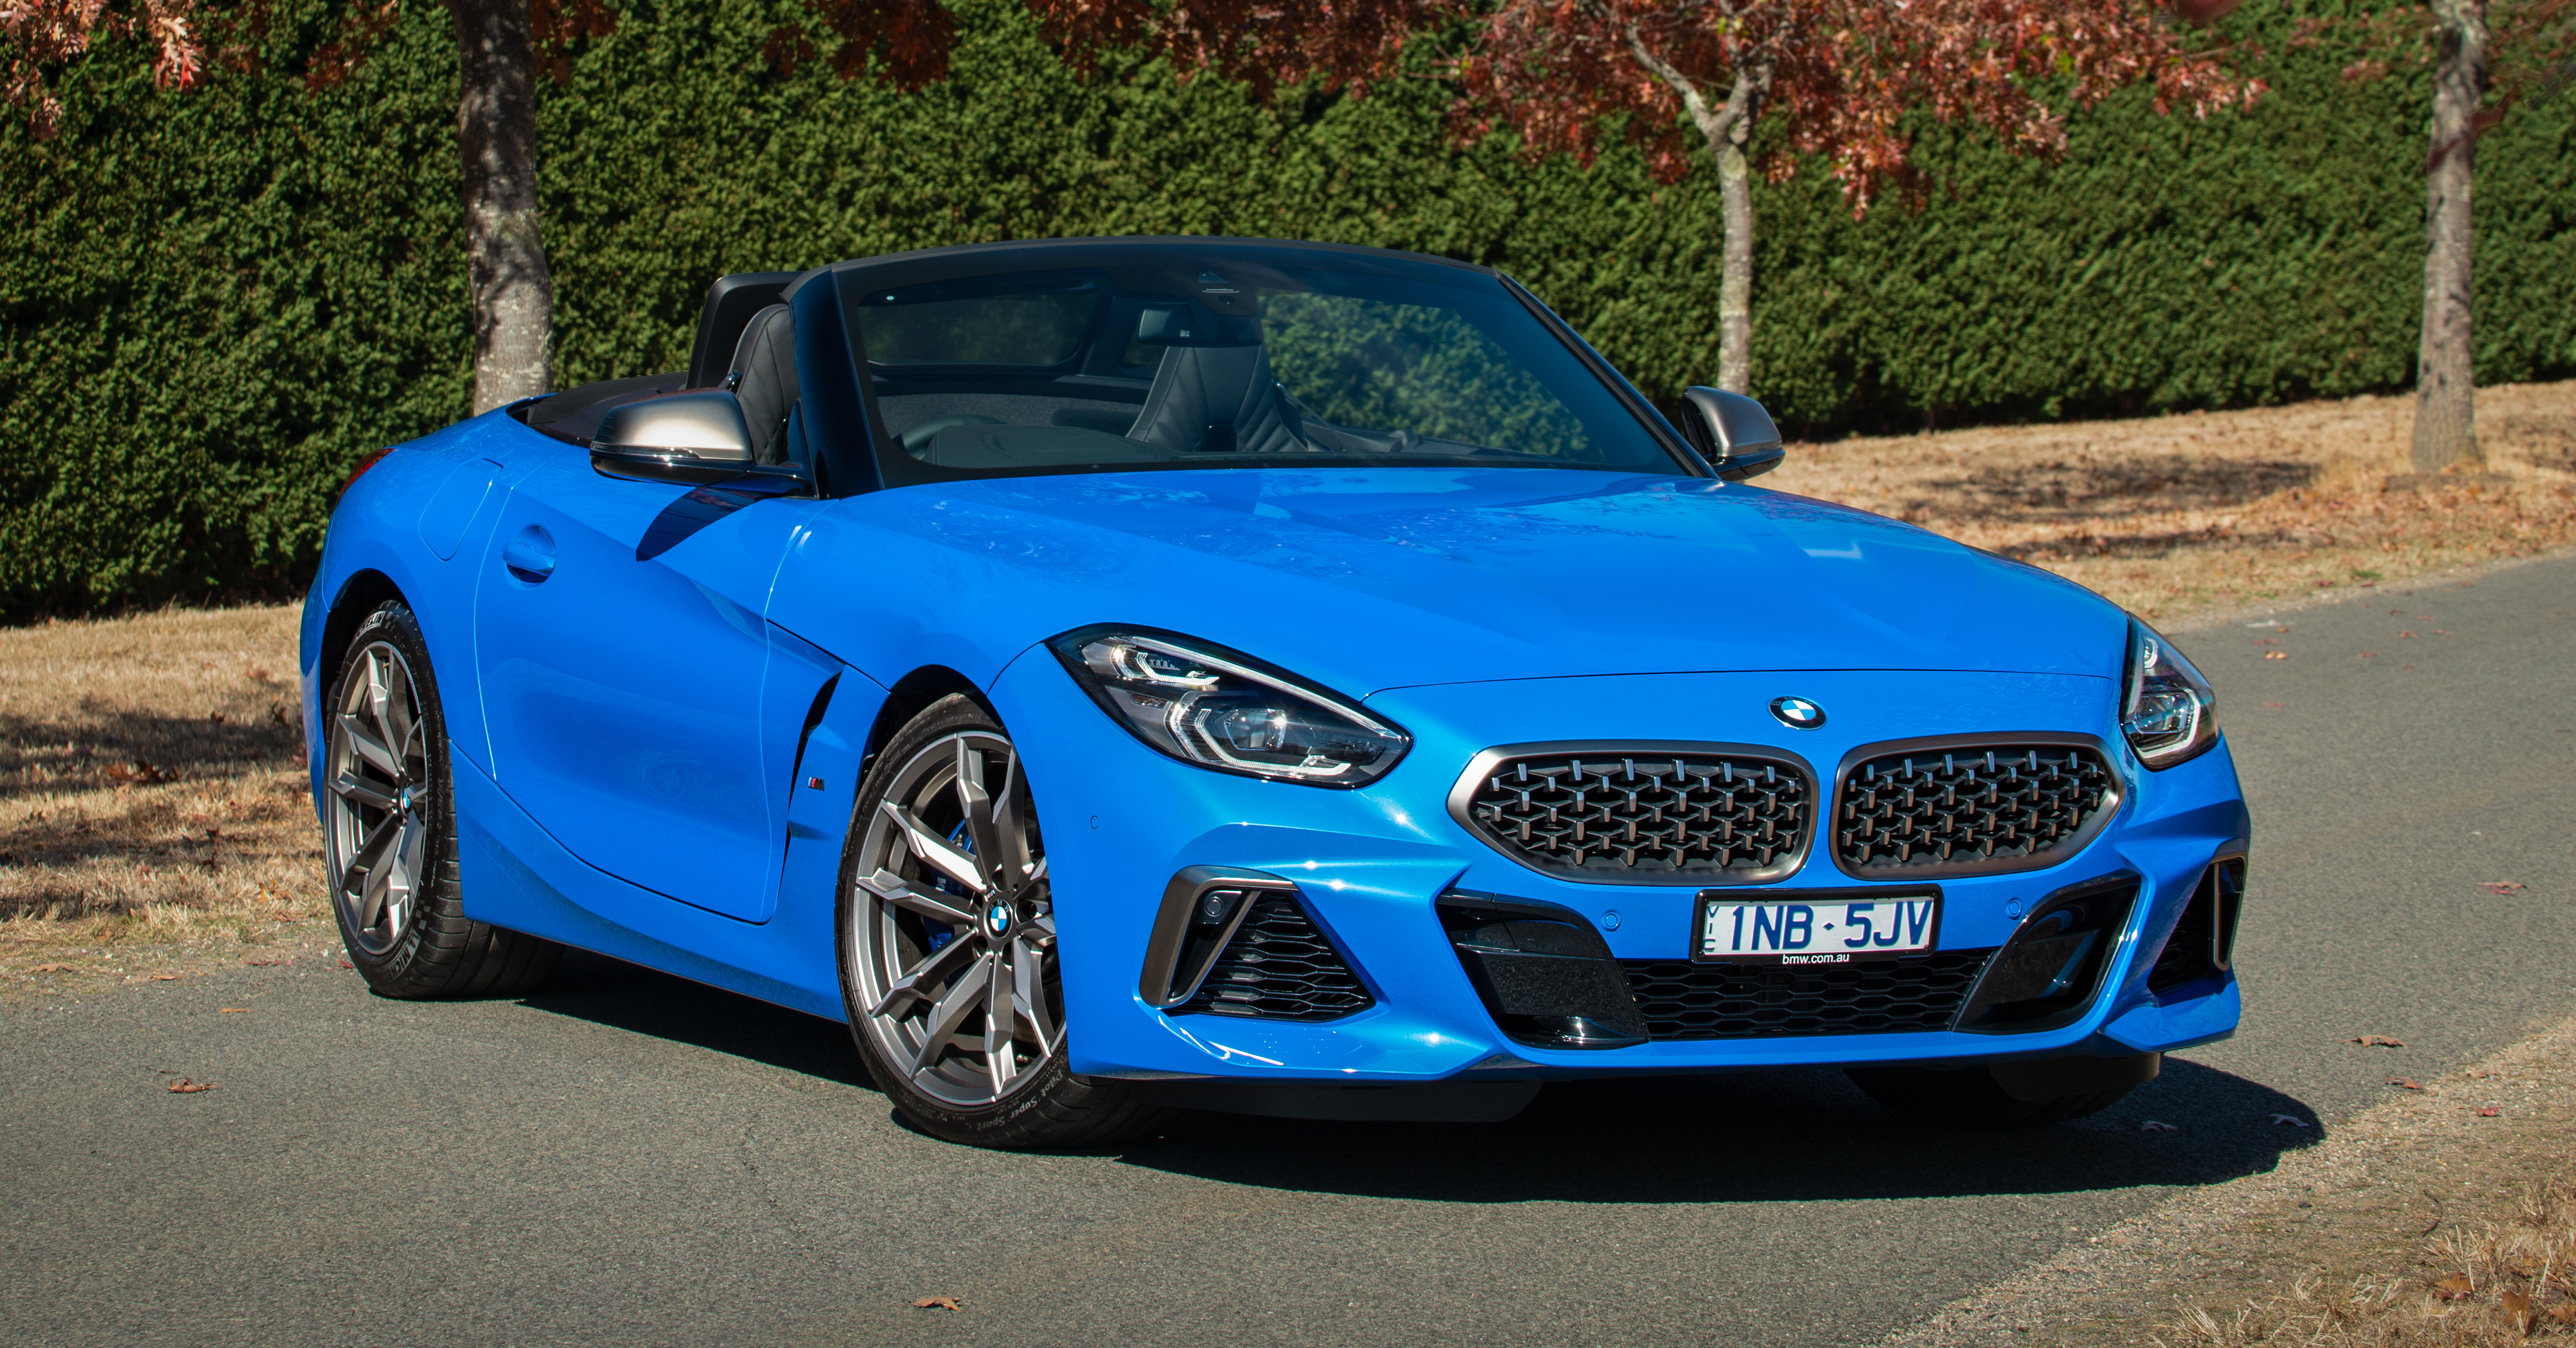 BMW Z4 Roadster (G29) exterior restyling